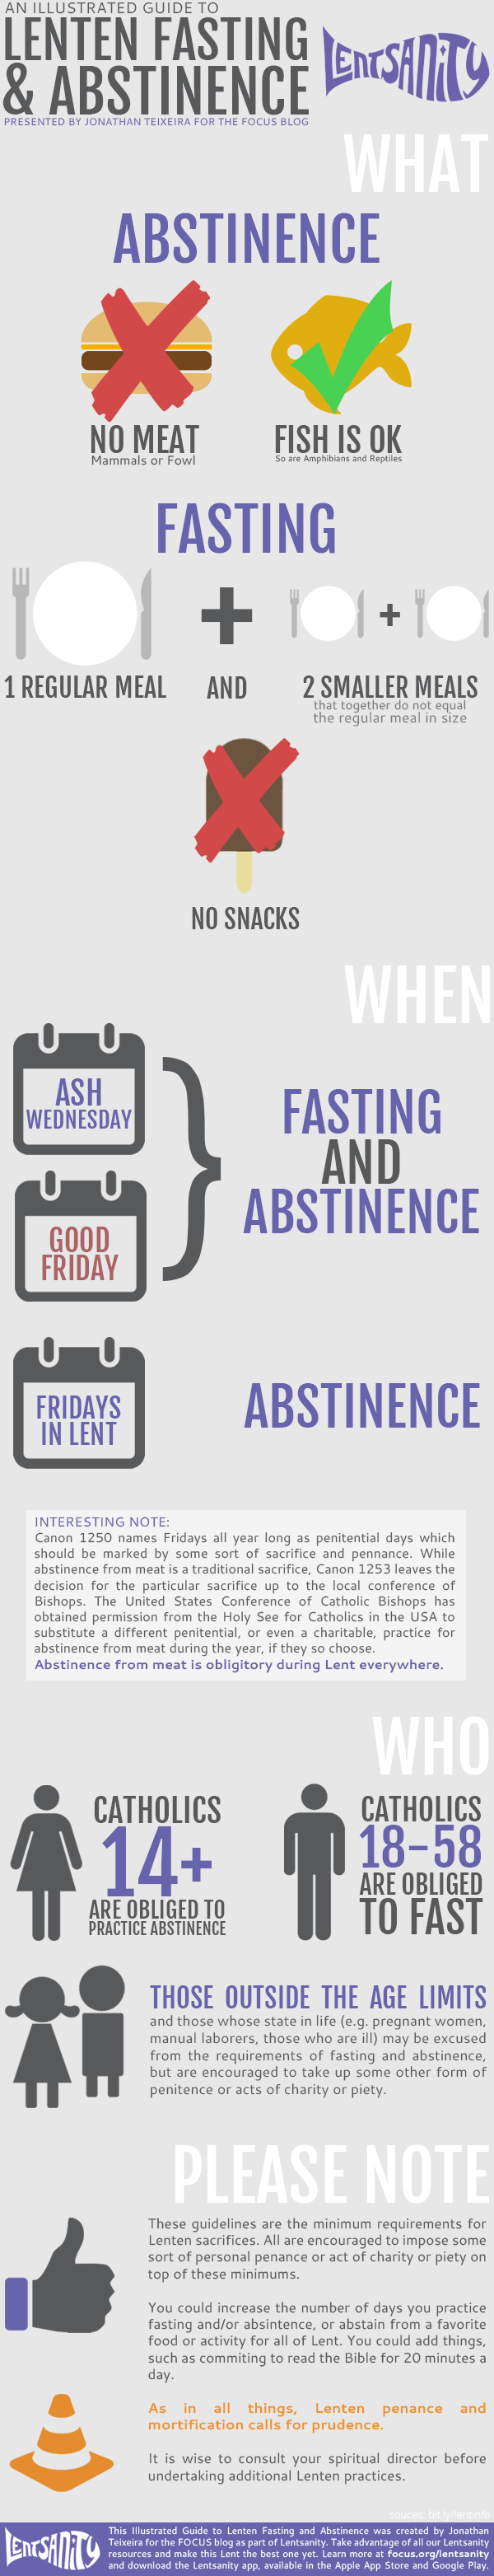 An Illustrated Guide to Lenten Fasting & Abstinence